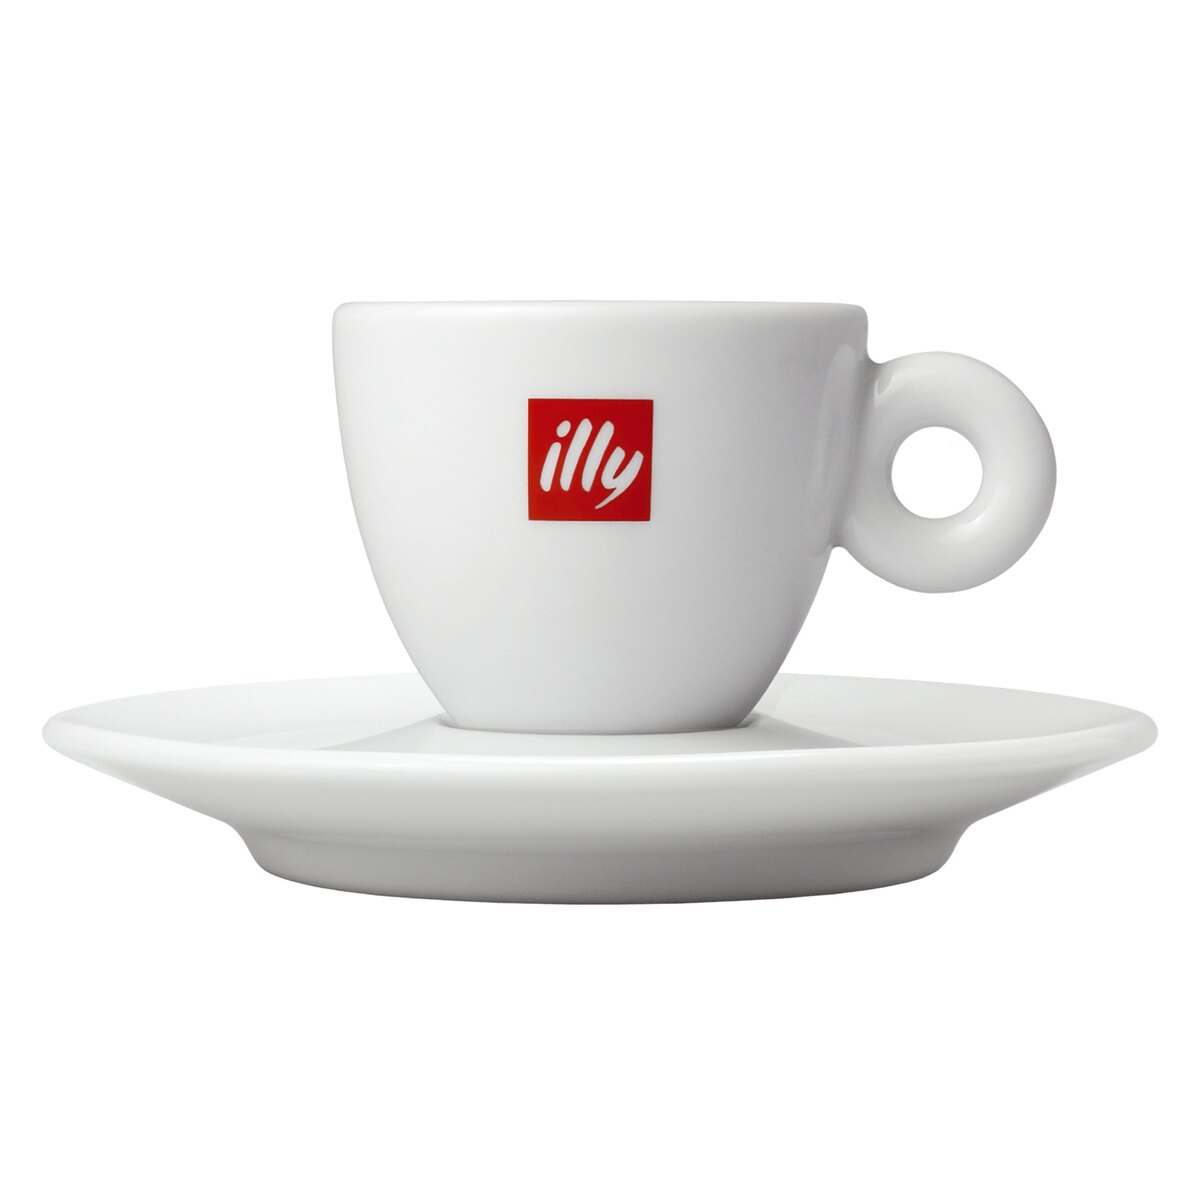 https://www.illy.com/on/demandware.static/-/Sites-masterCatalog_illycaffe/default/dwa0b81ae8/products/Cups/Essential/A007_accessories_cups_illy-logo-esp-cups_illy-shop/illy-logo-espresso-cup.jpg